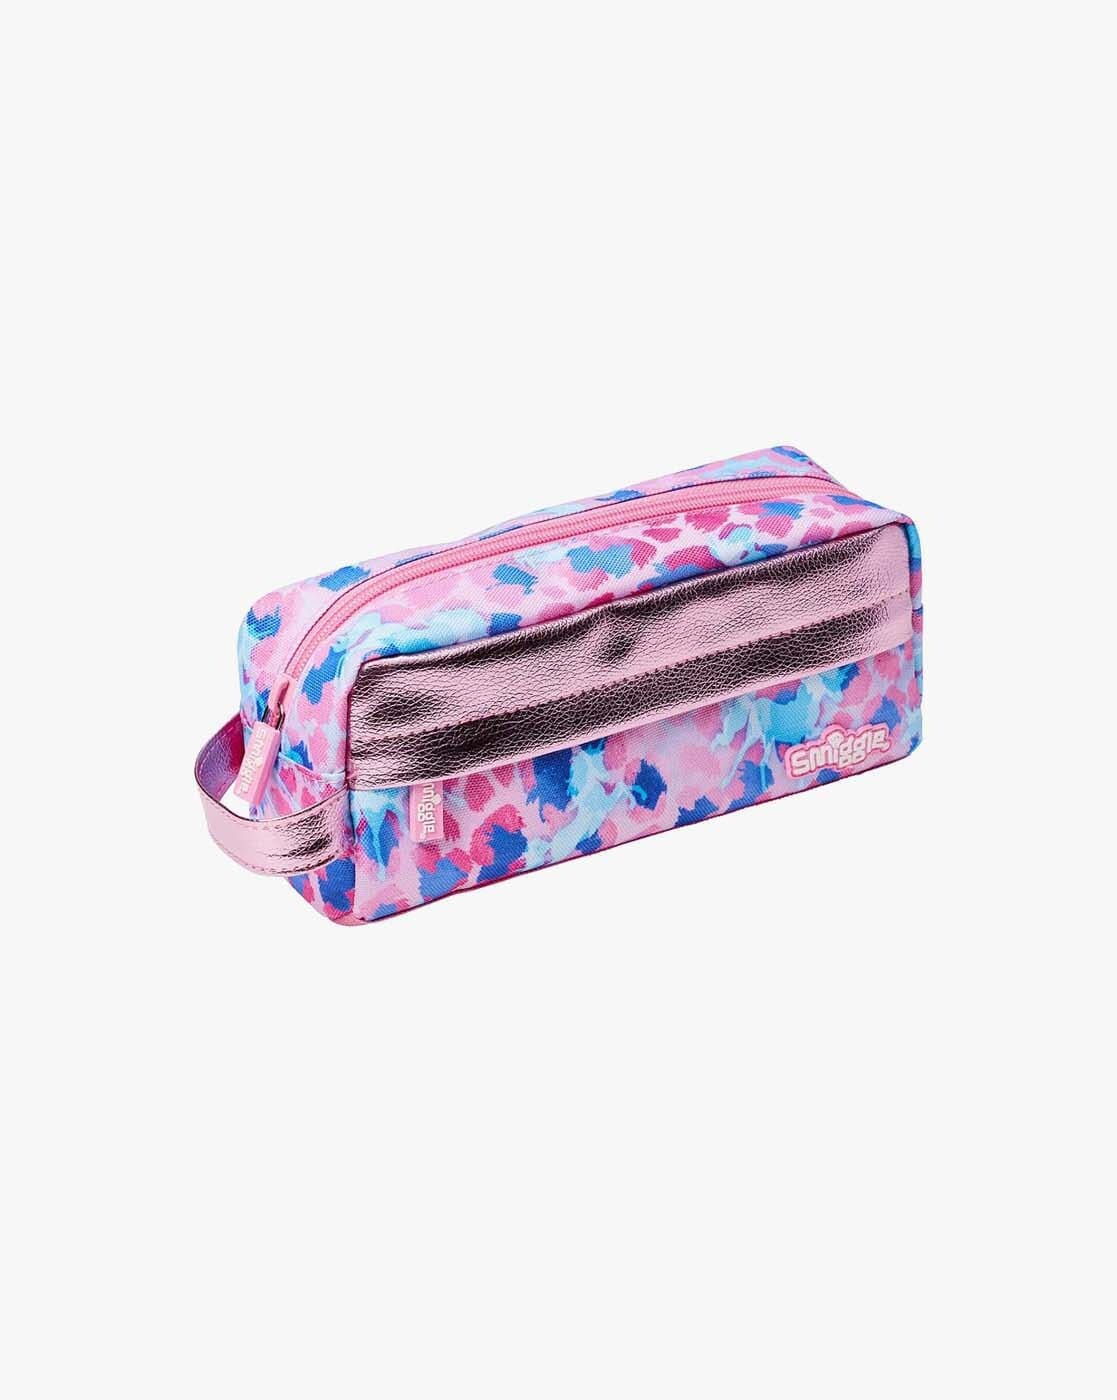 New Smiggle Lets Play Lanyard wallet kids wallet girls coin purse | eBay